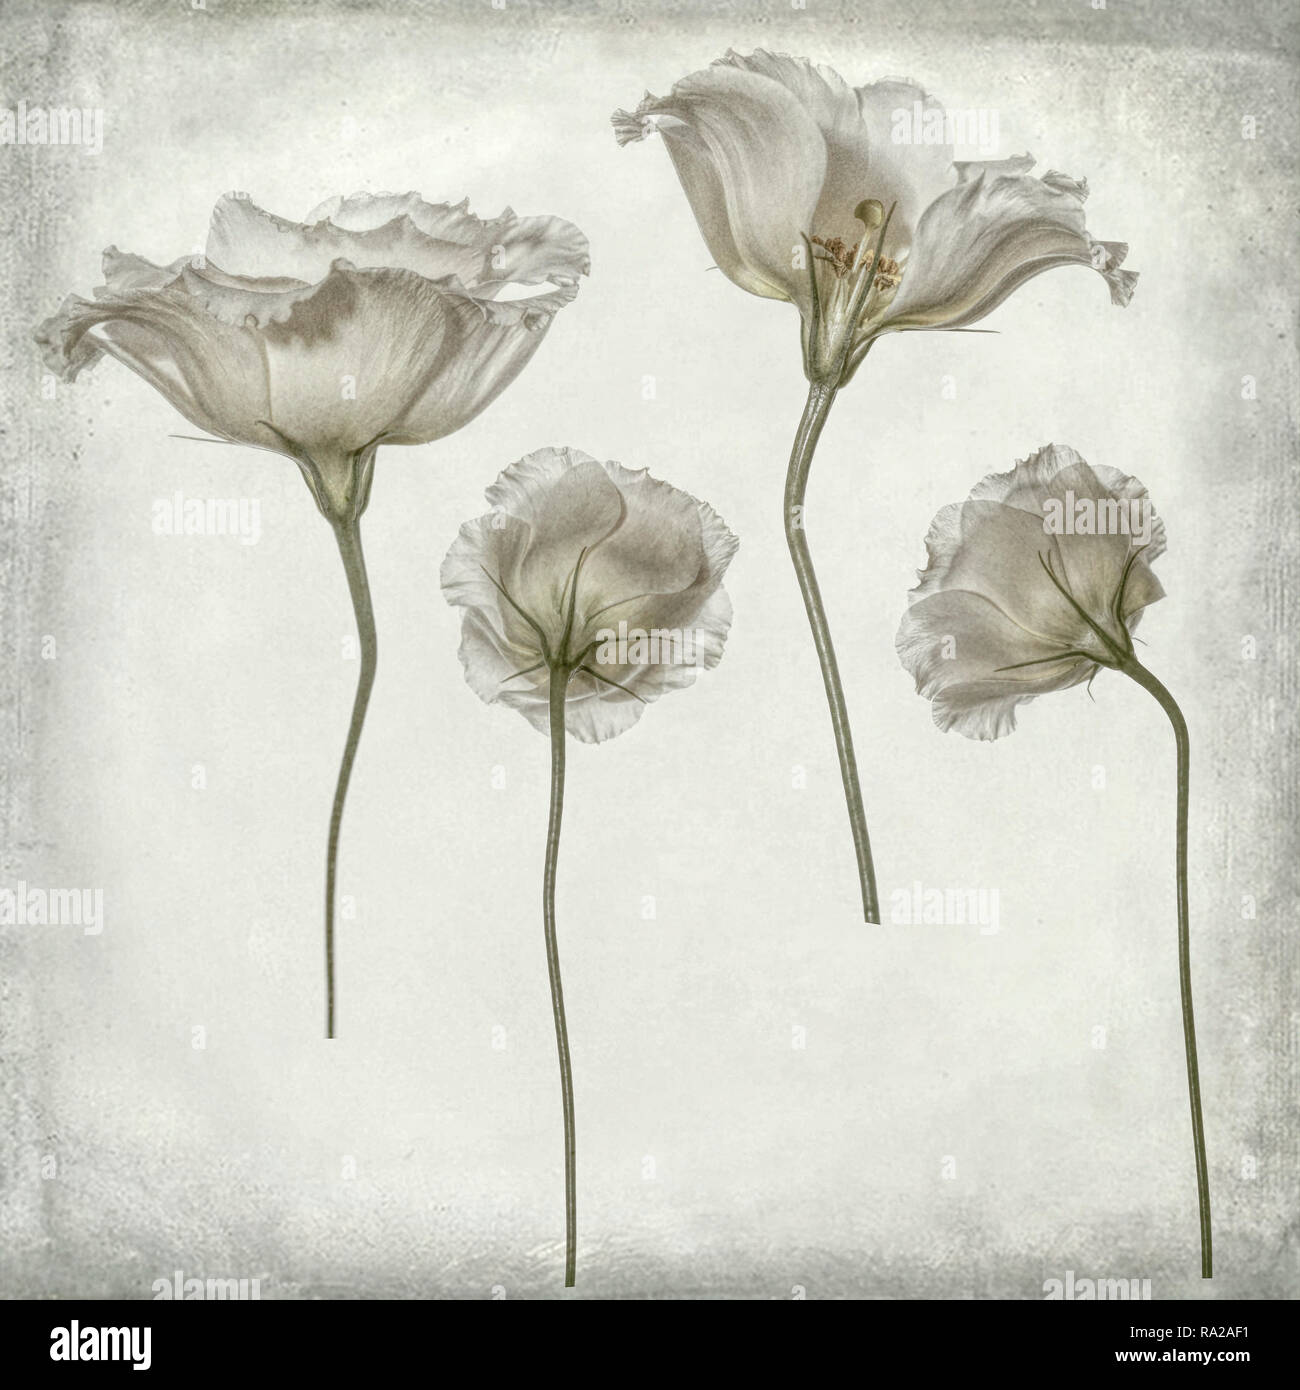 White lisianthus photographed from different angles arranged on a plain background, digital art photography Stock Photo